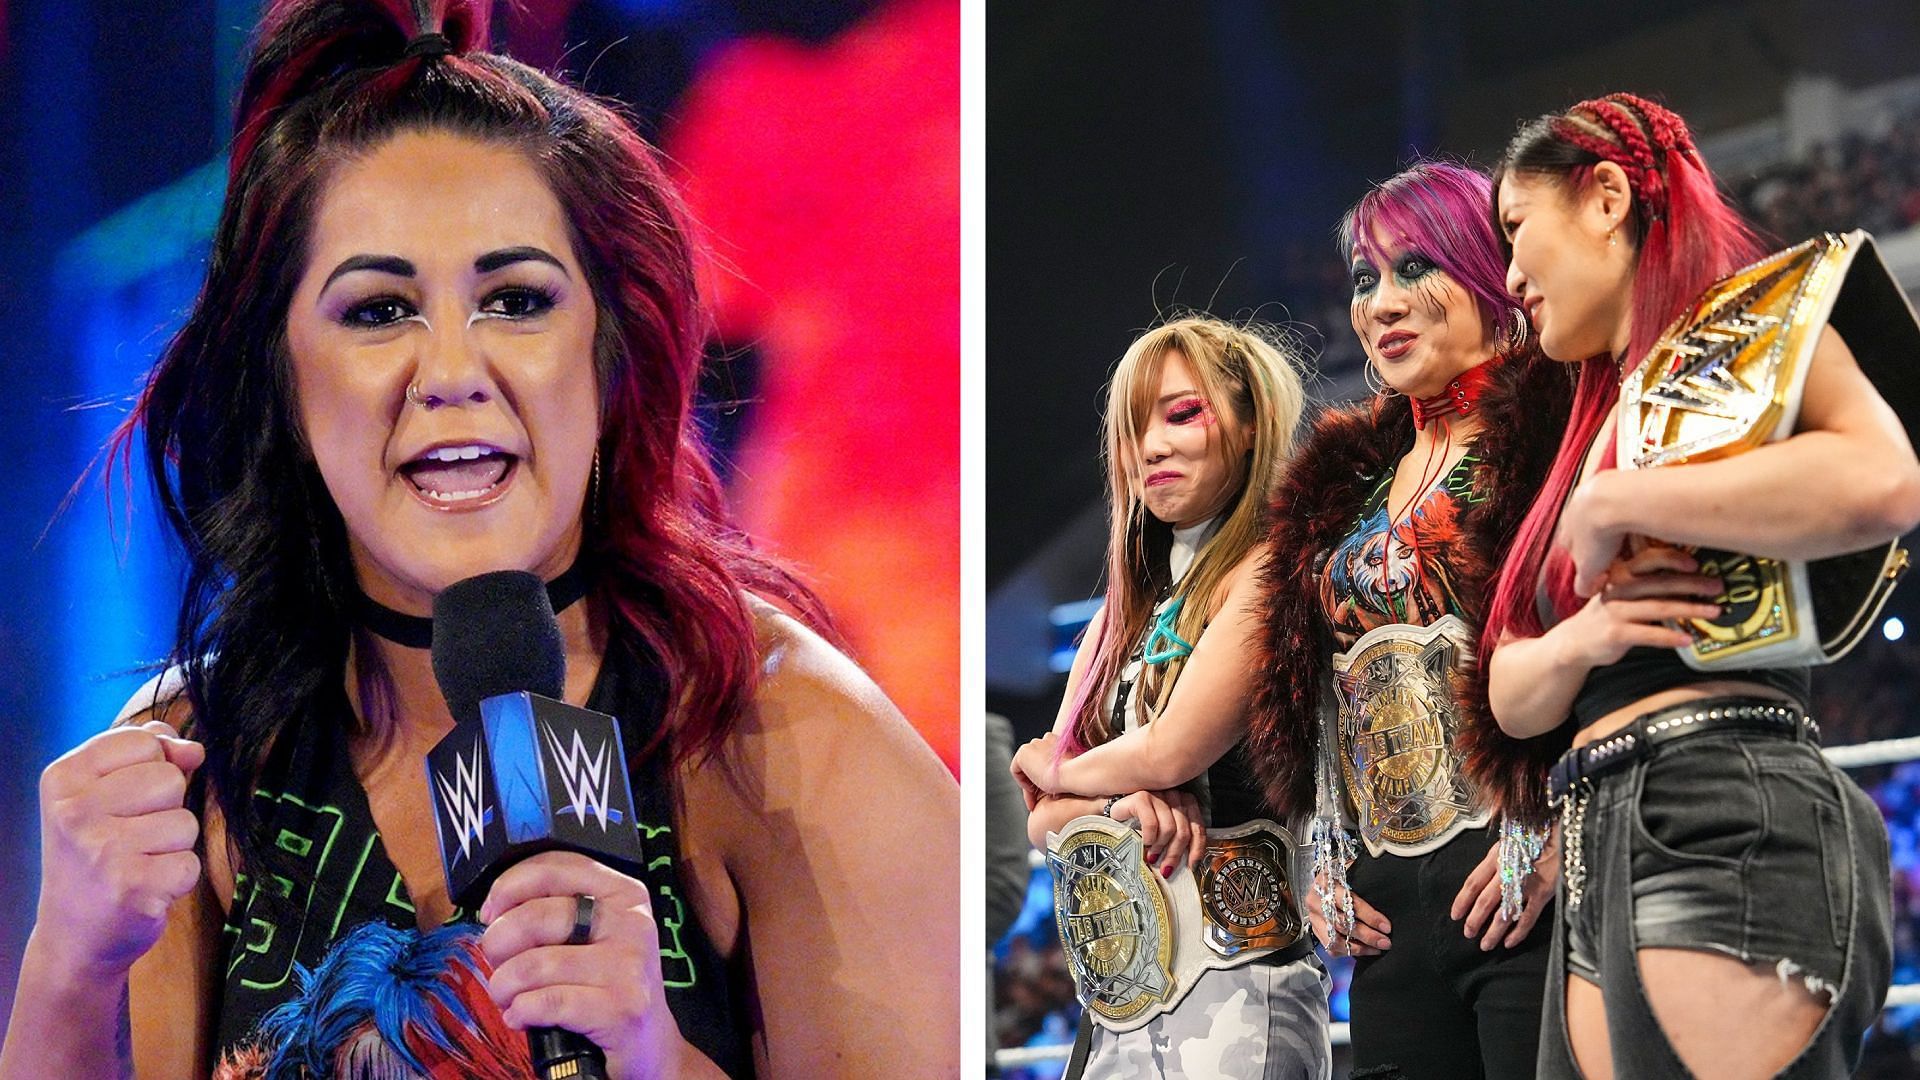 Bayley will likely appear on WWE Friday Night SmackDown